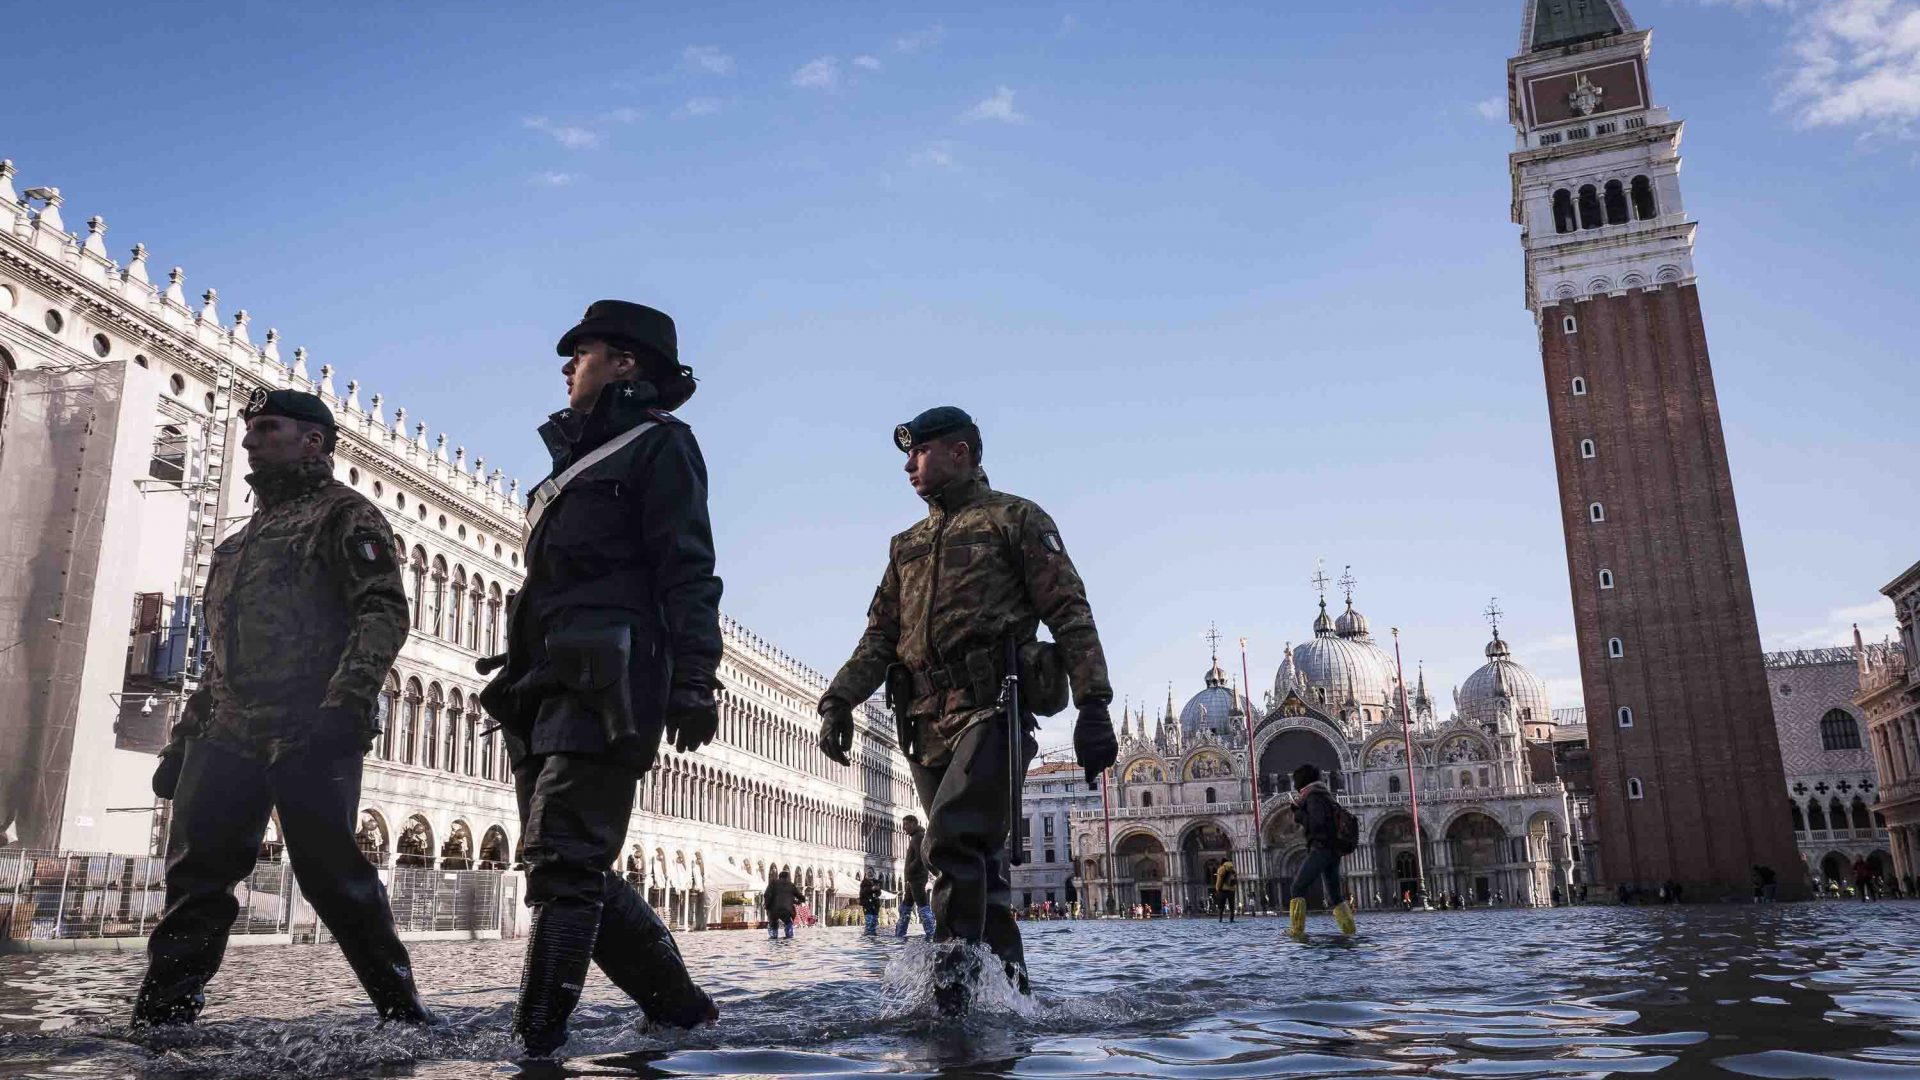 Police and army officials walking through a flooded Piazza San Marco.